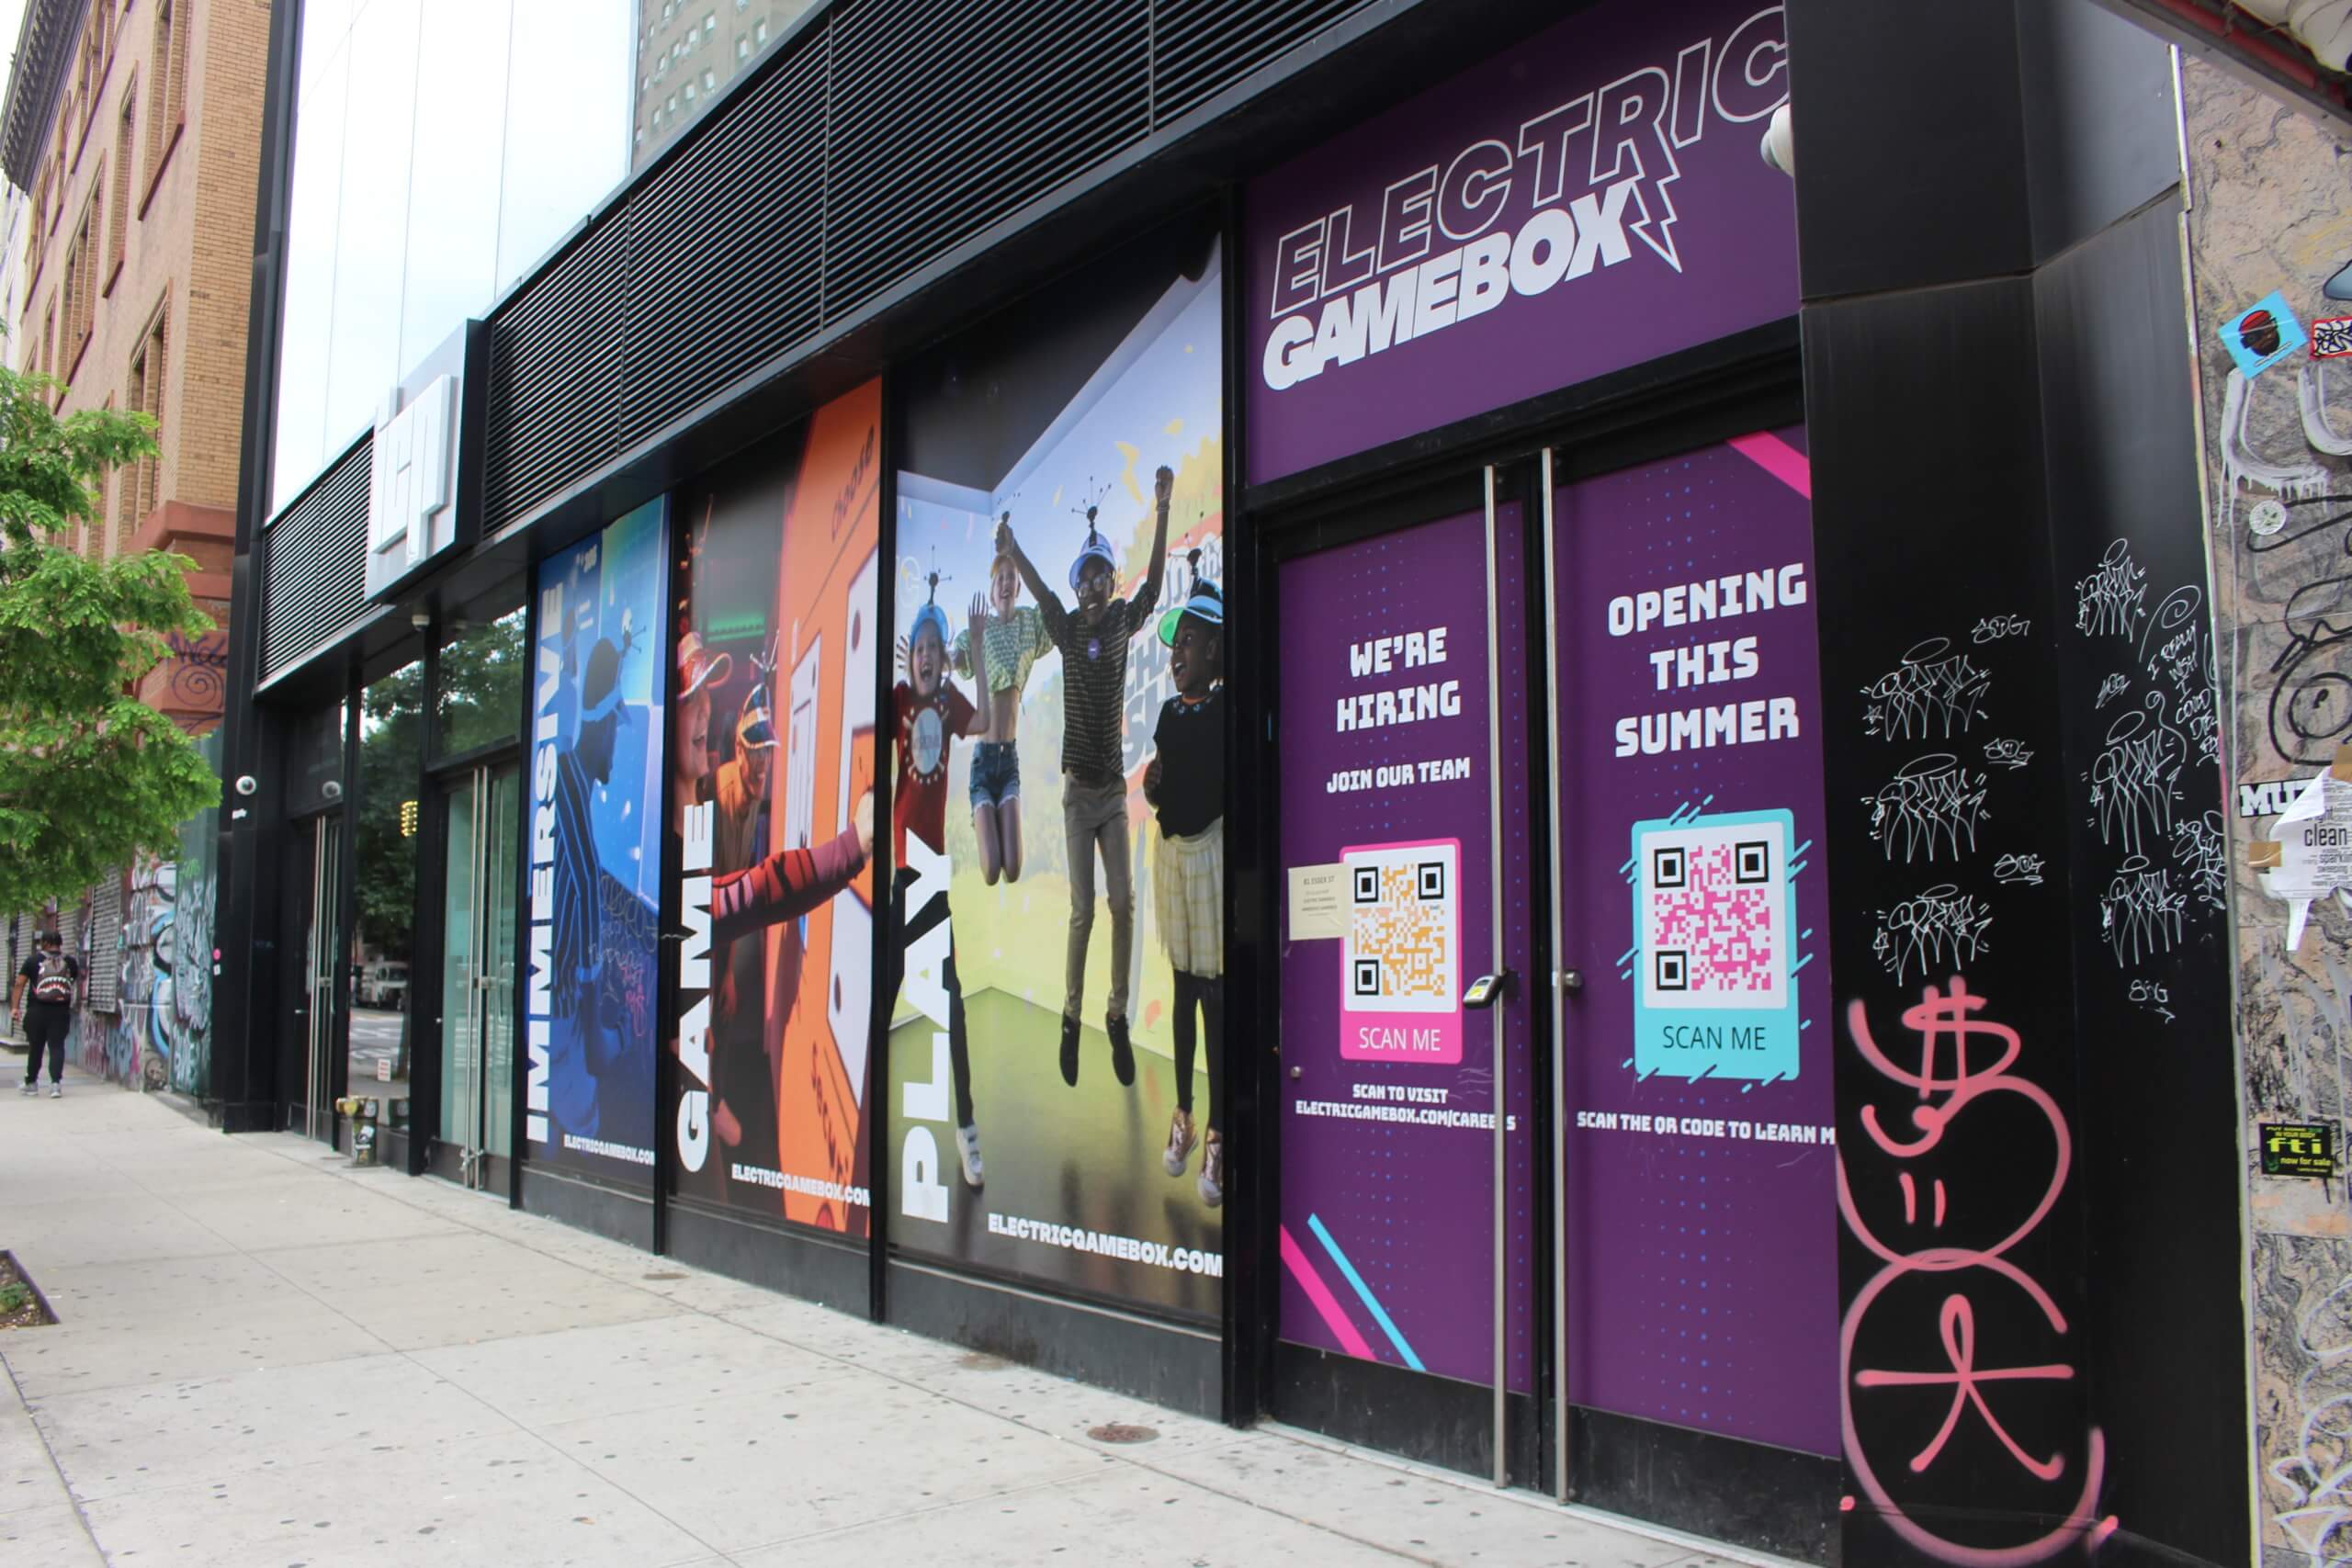 Interactive gaming experience Immersive Gamebox to open new location in  Lower East Side